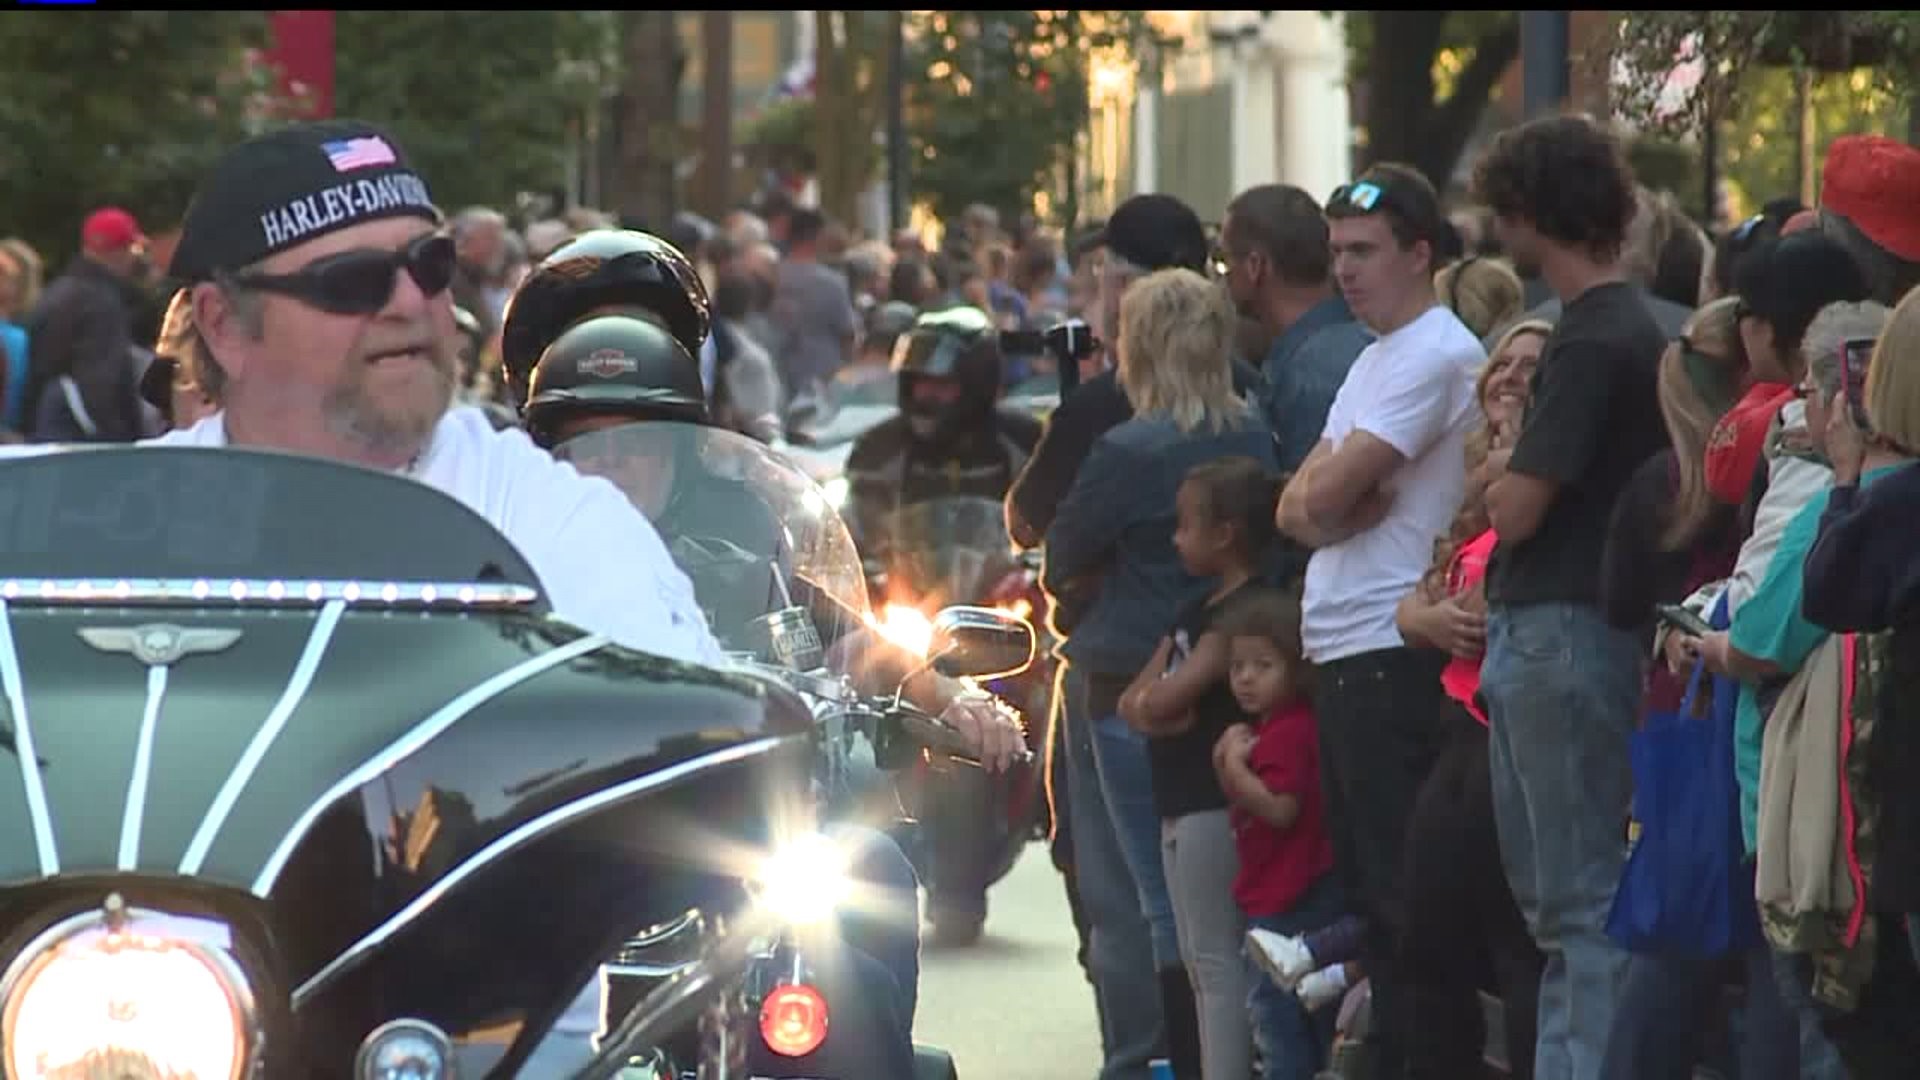 Harley Davidson ends open house, York Bike Night will continue as planned